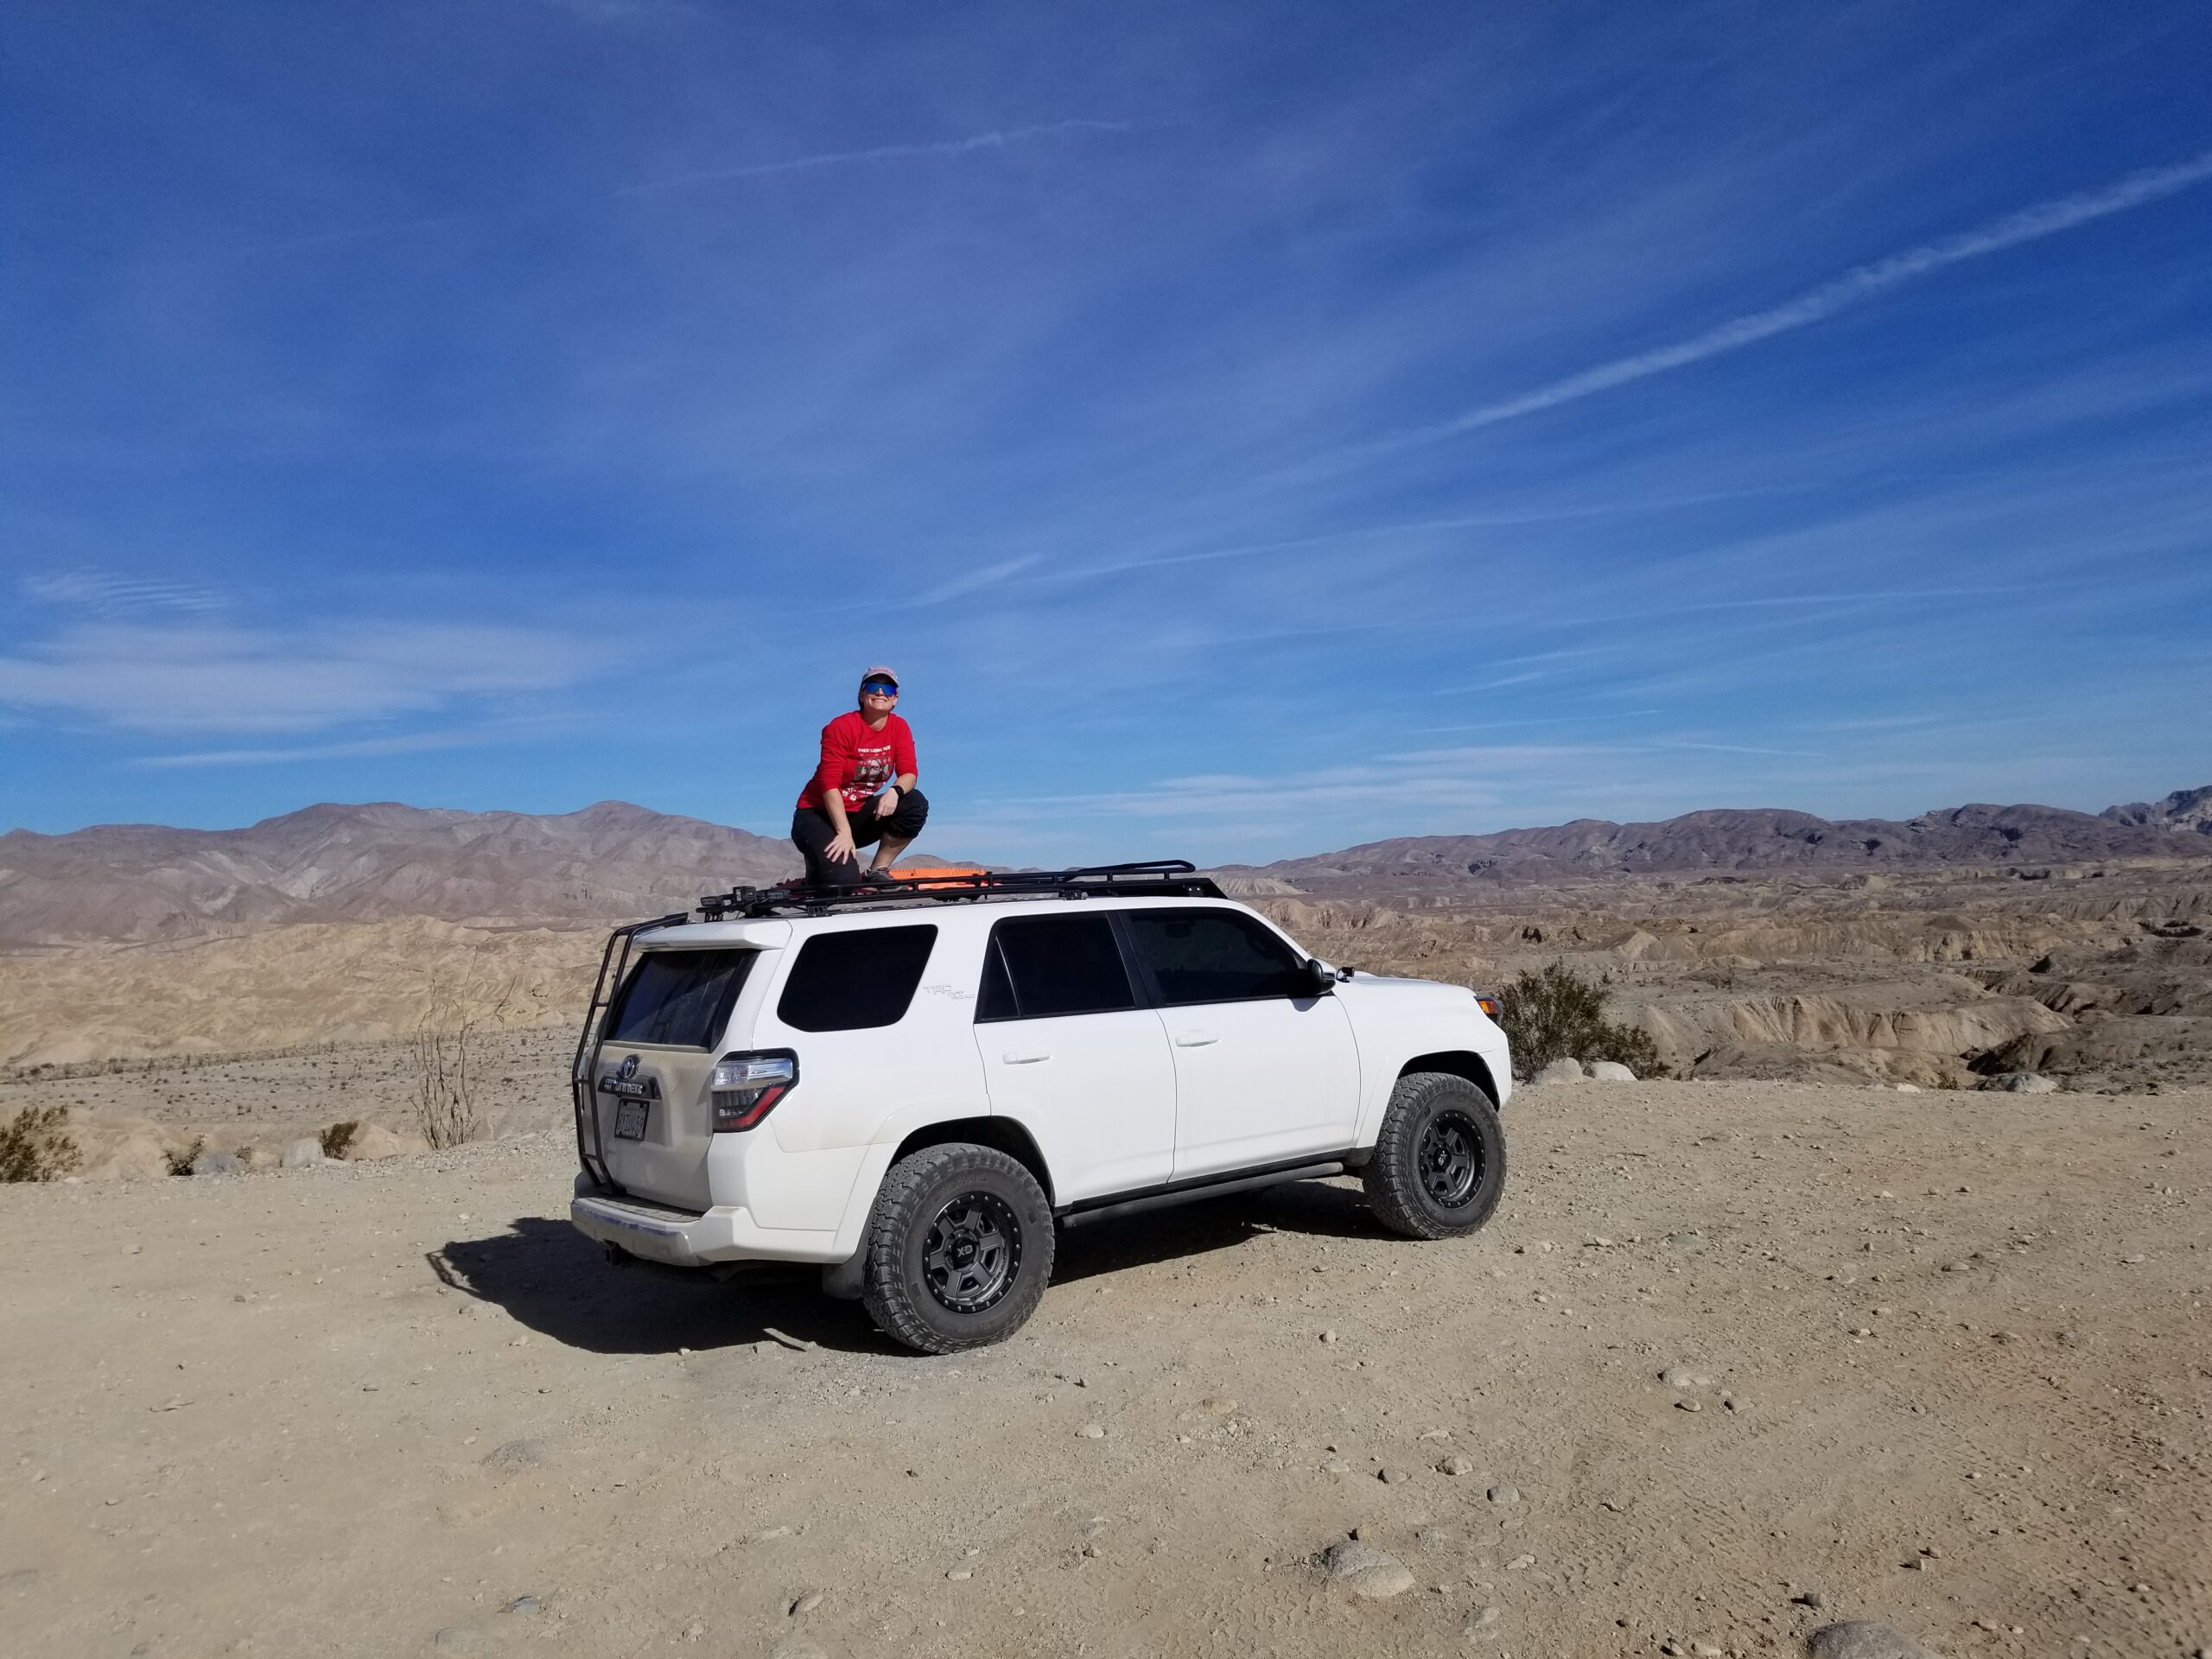 Lifted Toyota 4runner offroad at a desert lookout in Anza Borrego Desert State Park, CA, with the company owner